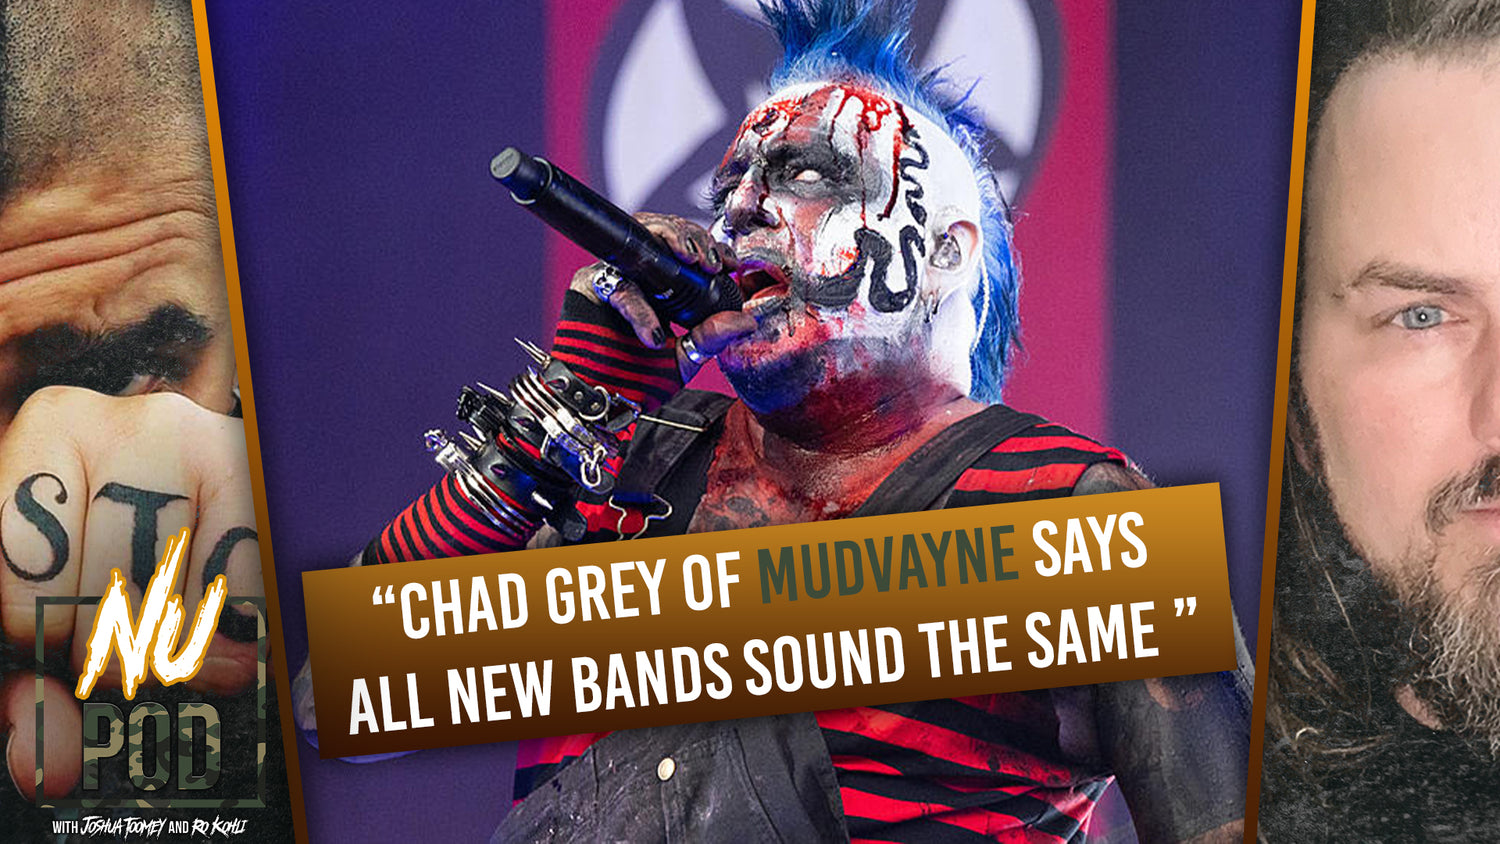 Ro Says New Mudvayne "Better Melt My Face Off" After Latest Comments From Vocalist Chad Grey